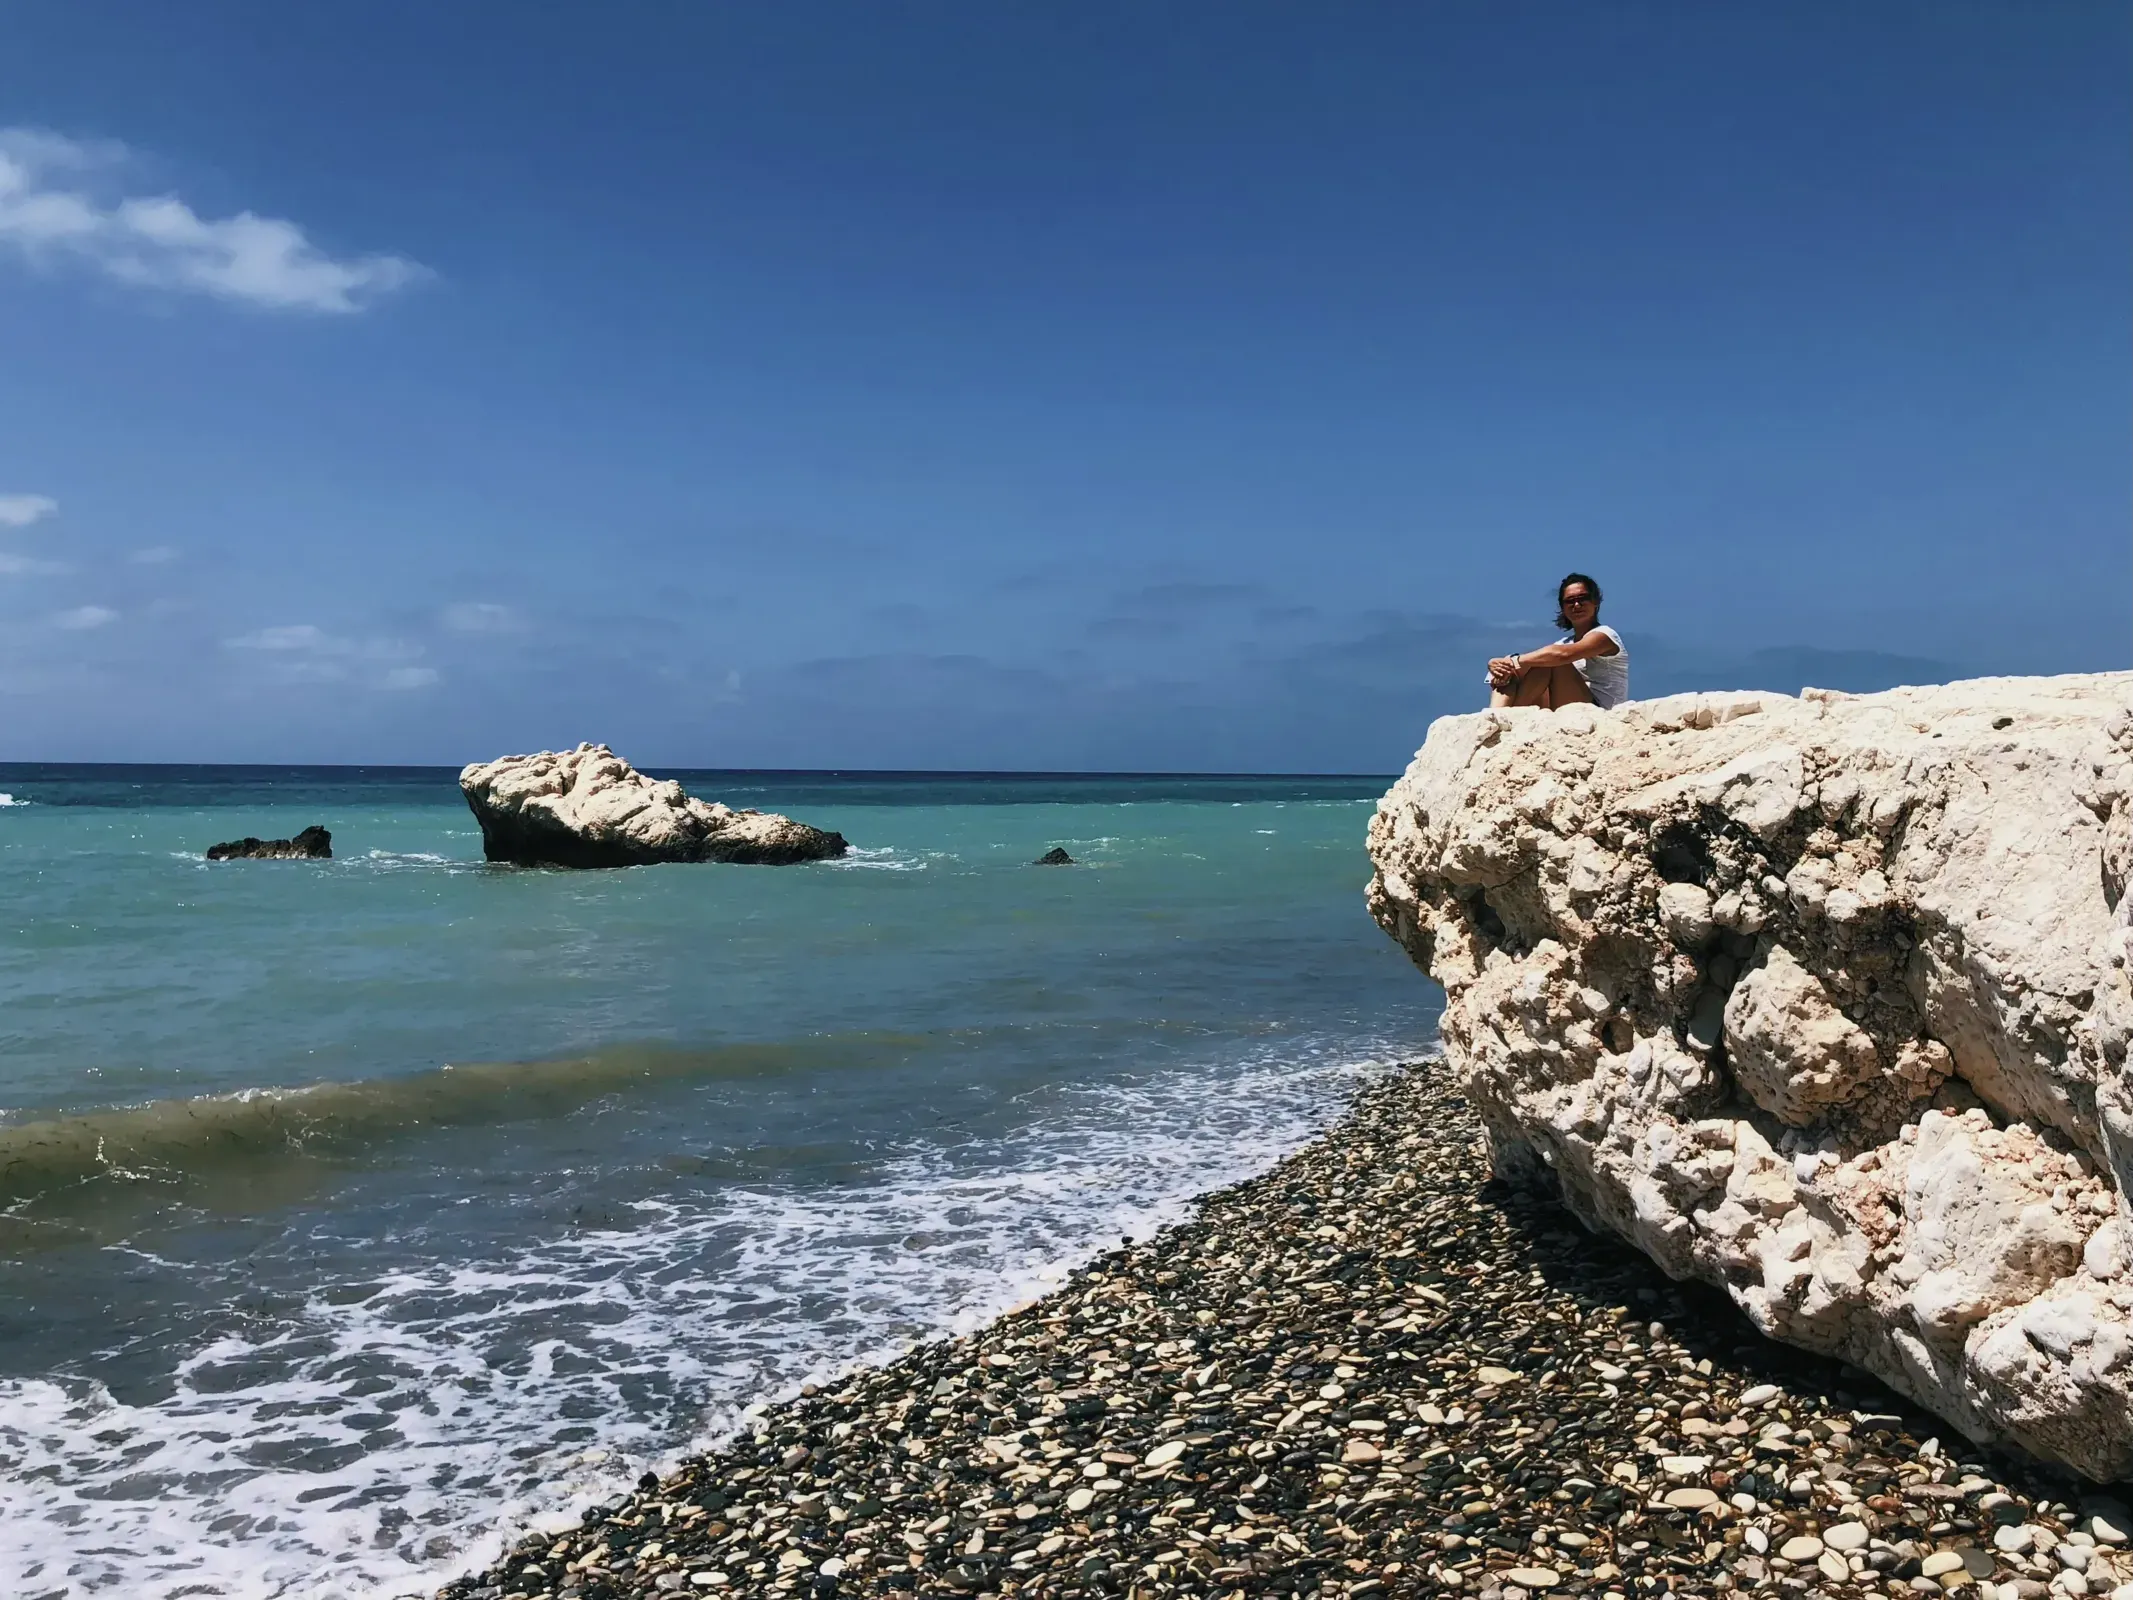 Serene scene at Aphrodite's Rock, a tropical beach with a single individual perched atop a rock.